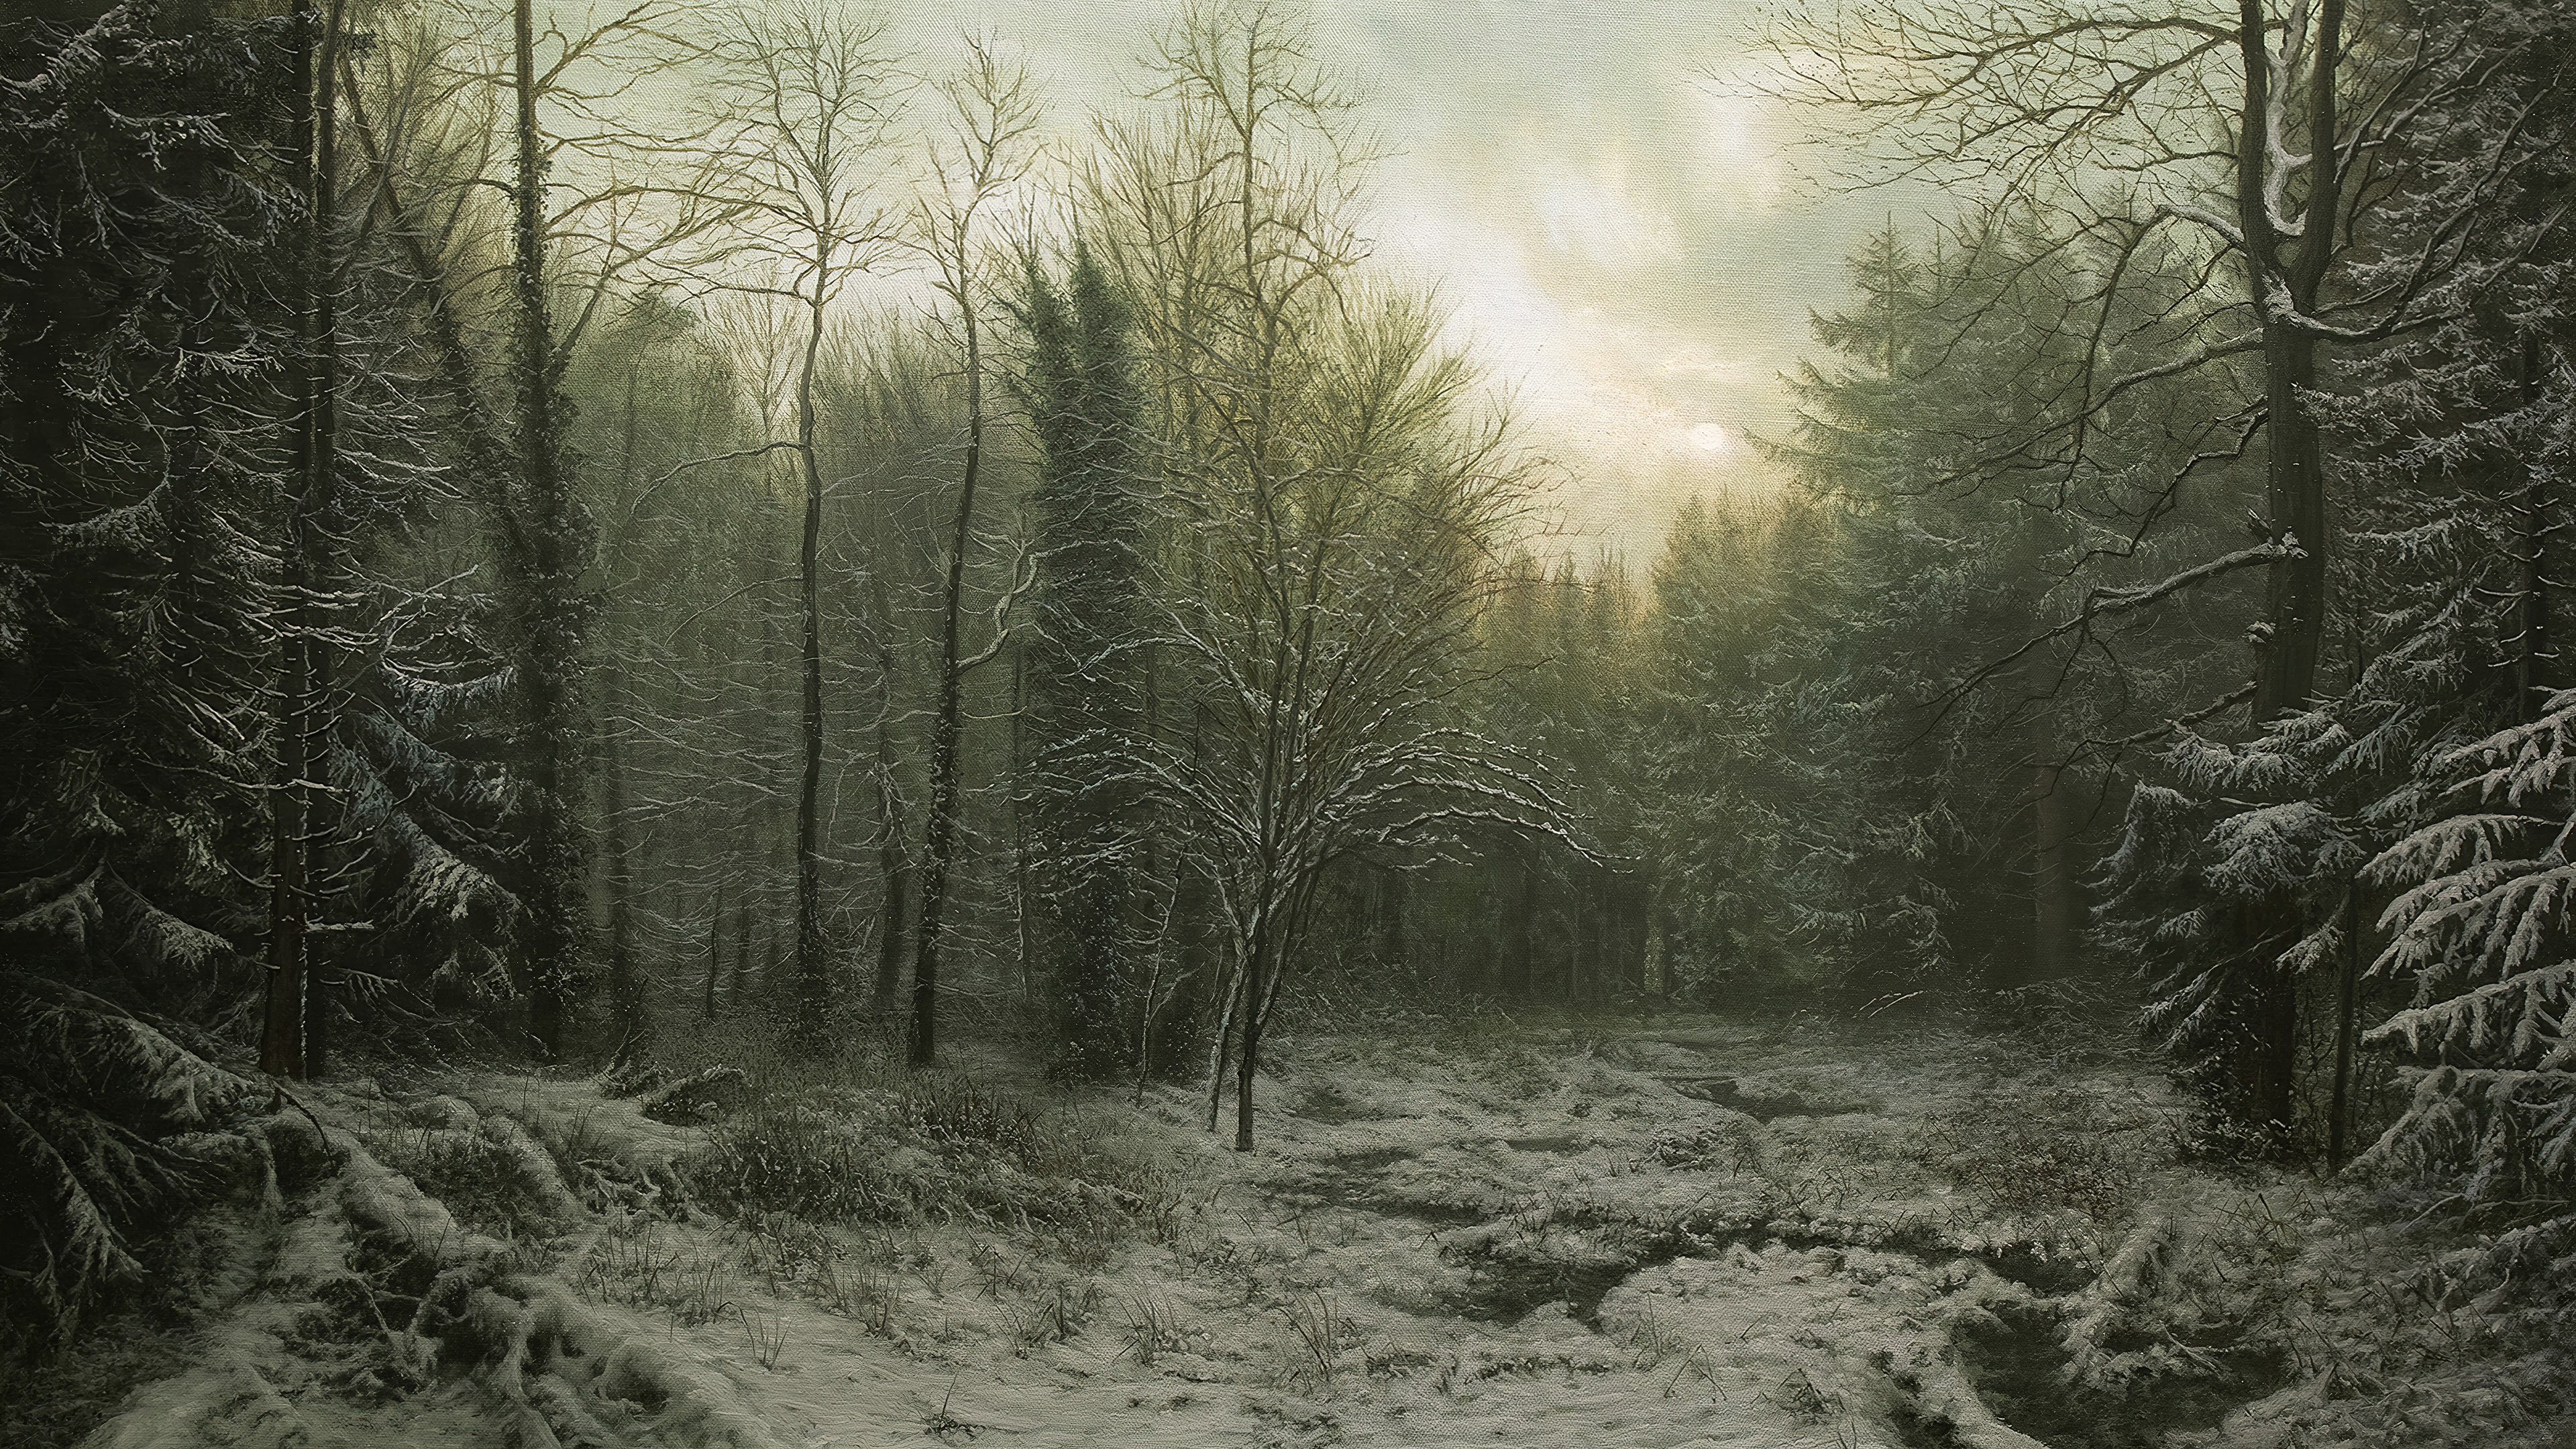 General 3840x2160 nature painting trees forest dark snow winter morning cold outdoors